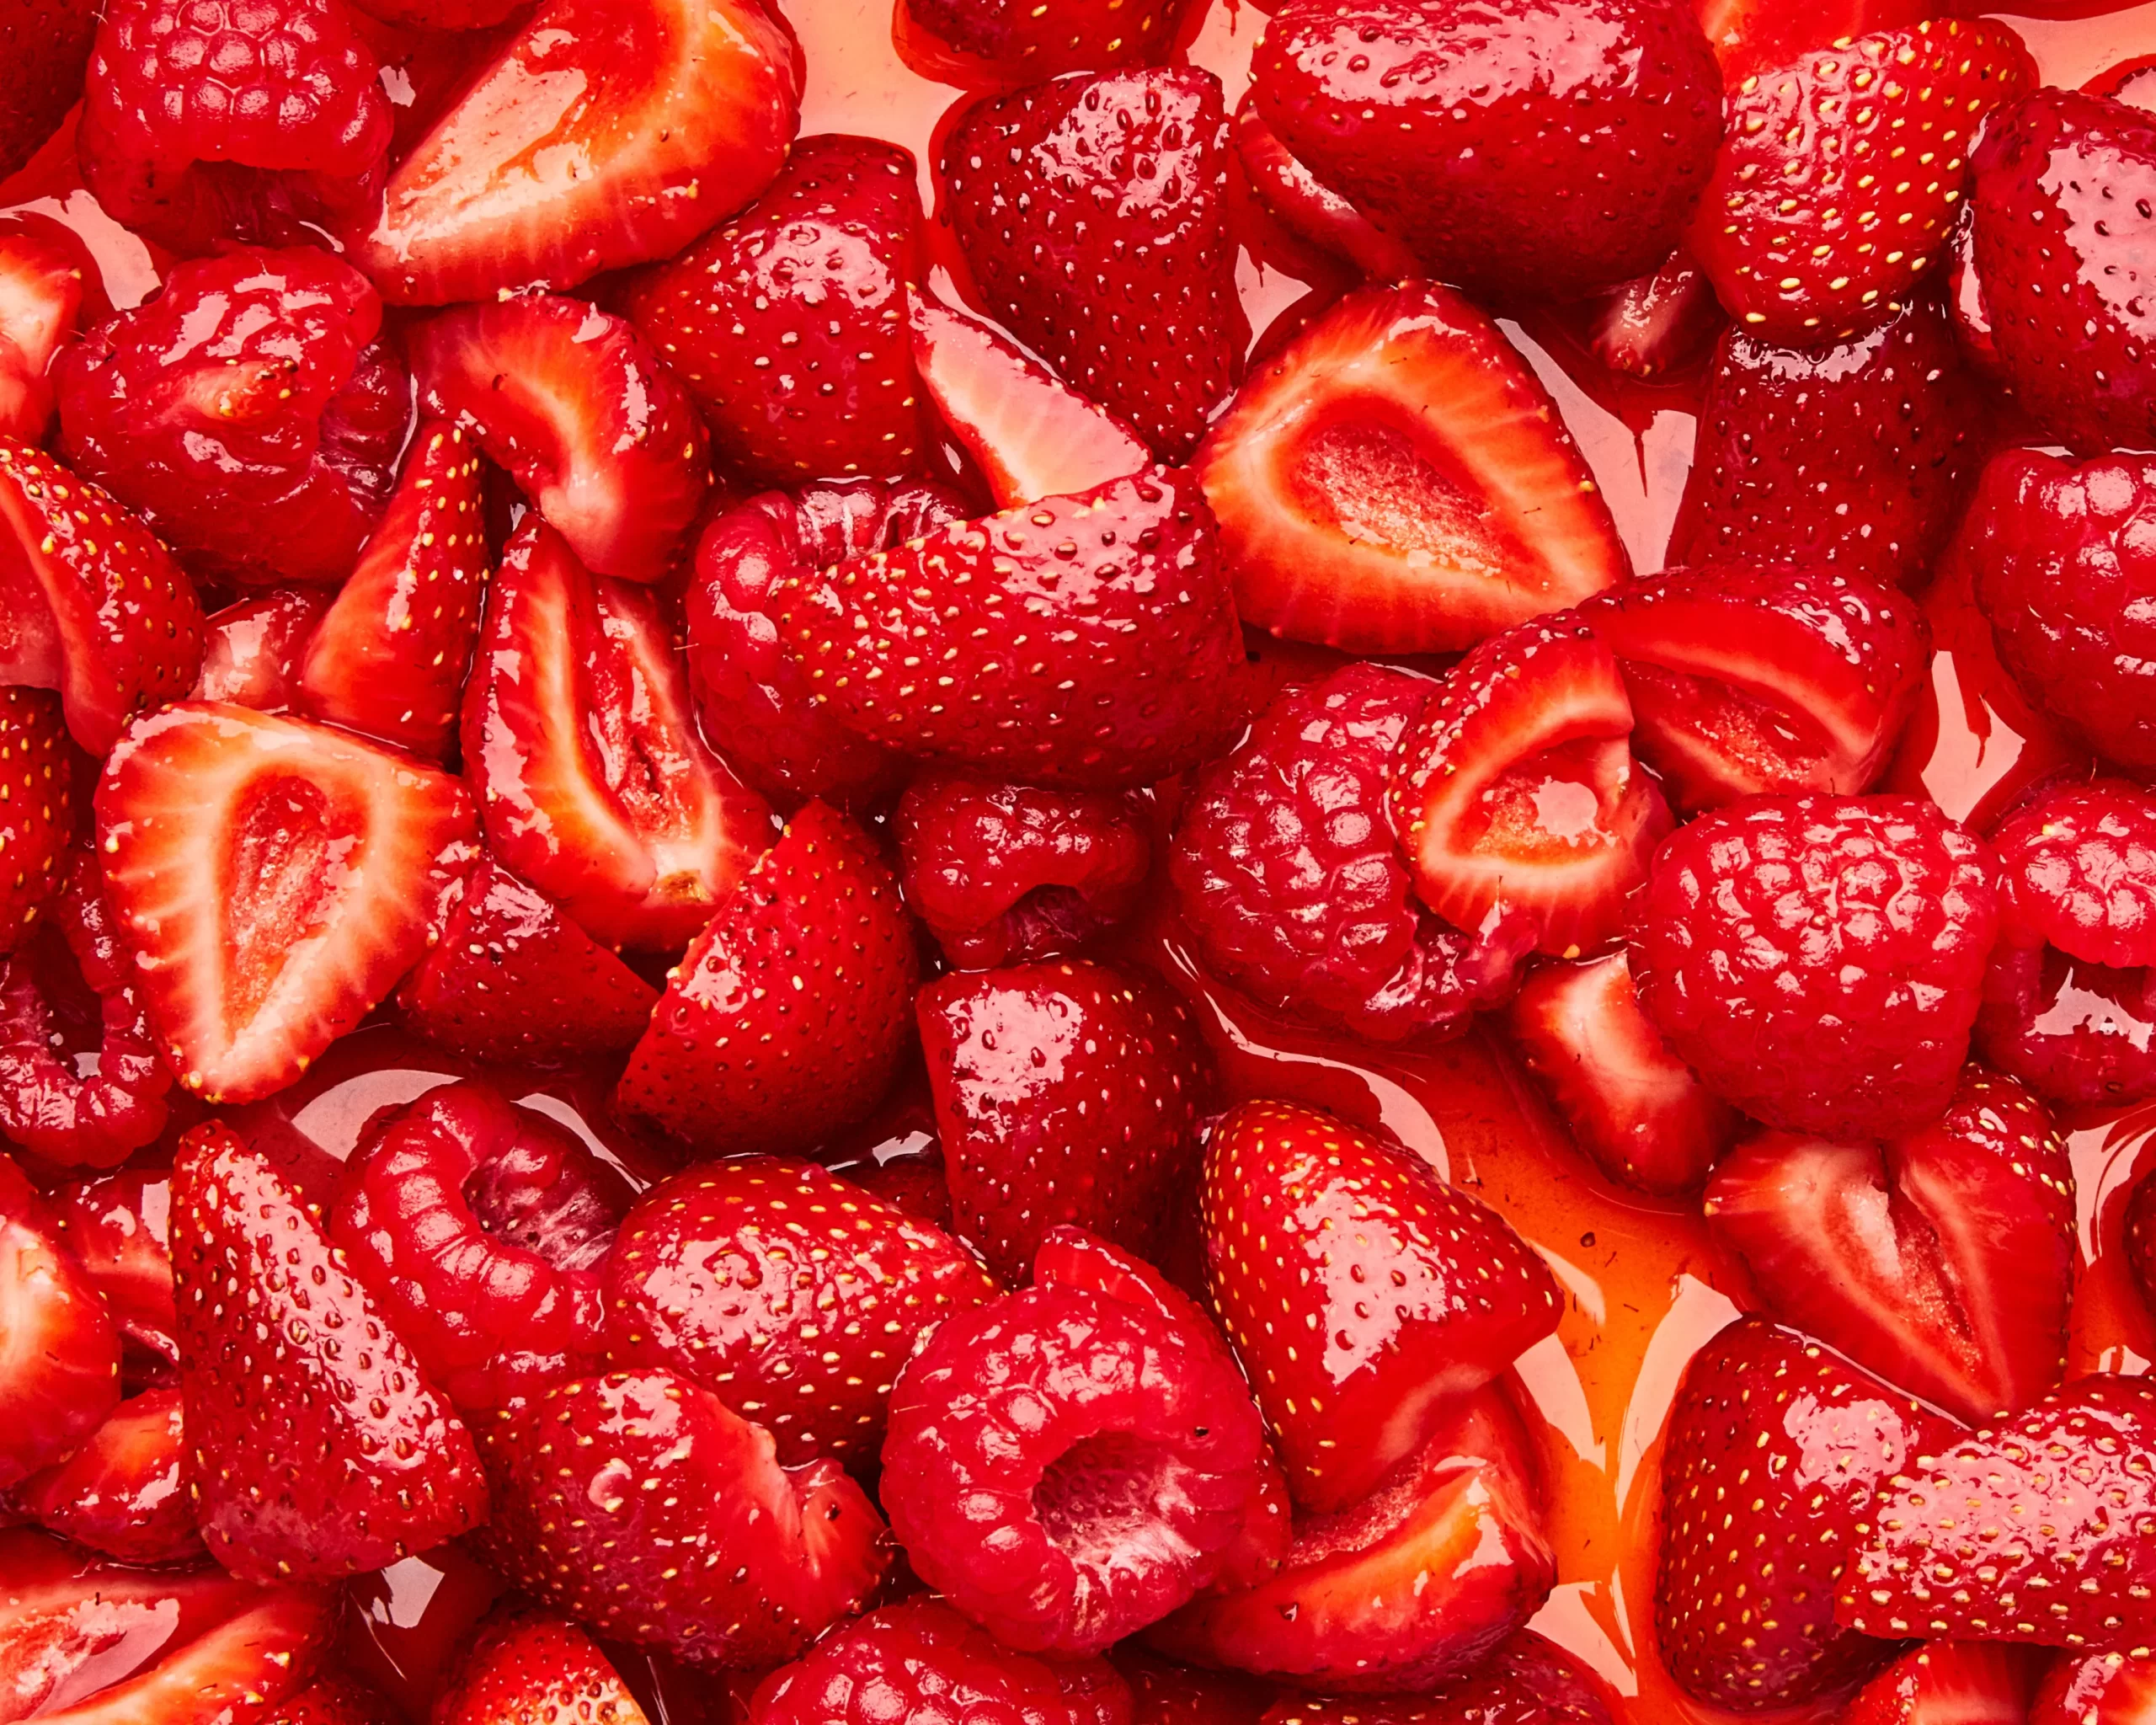 The History of Strawberries